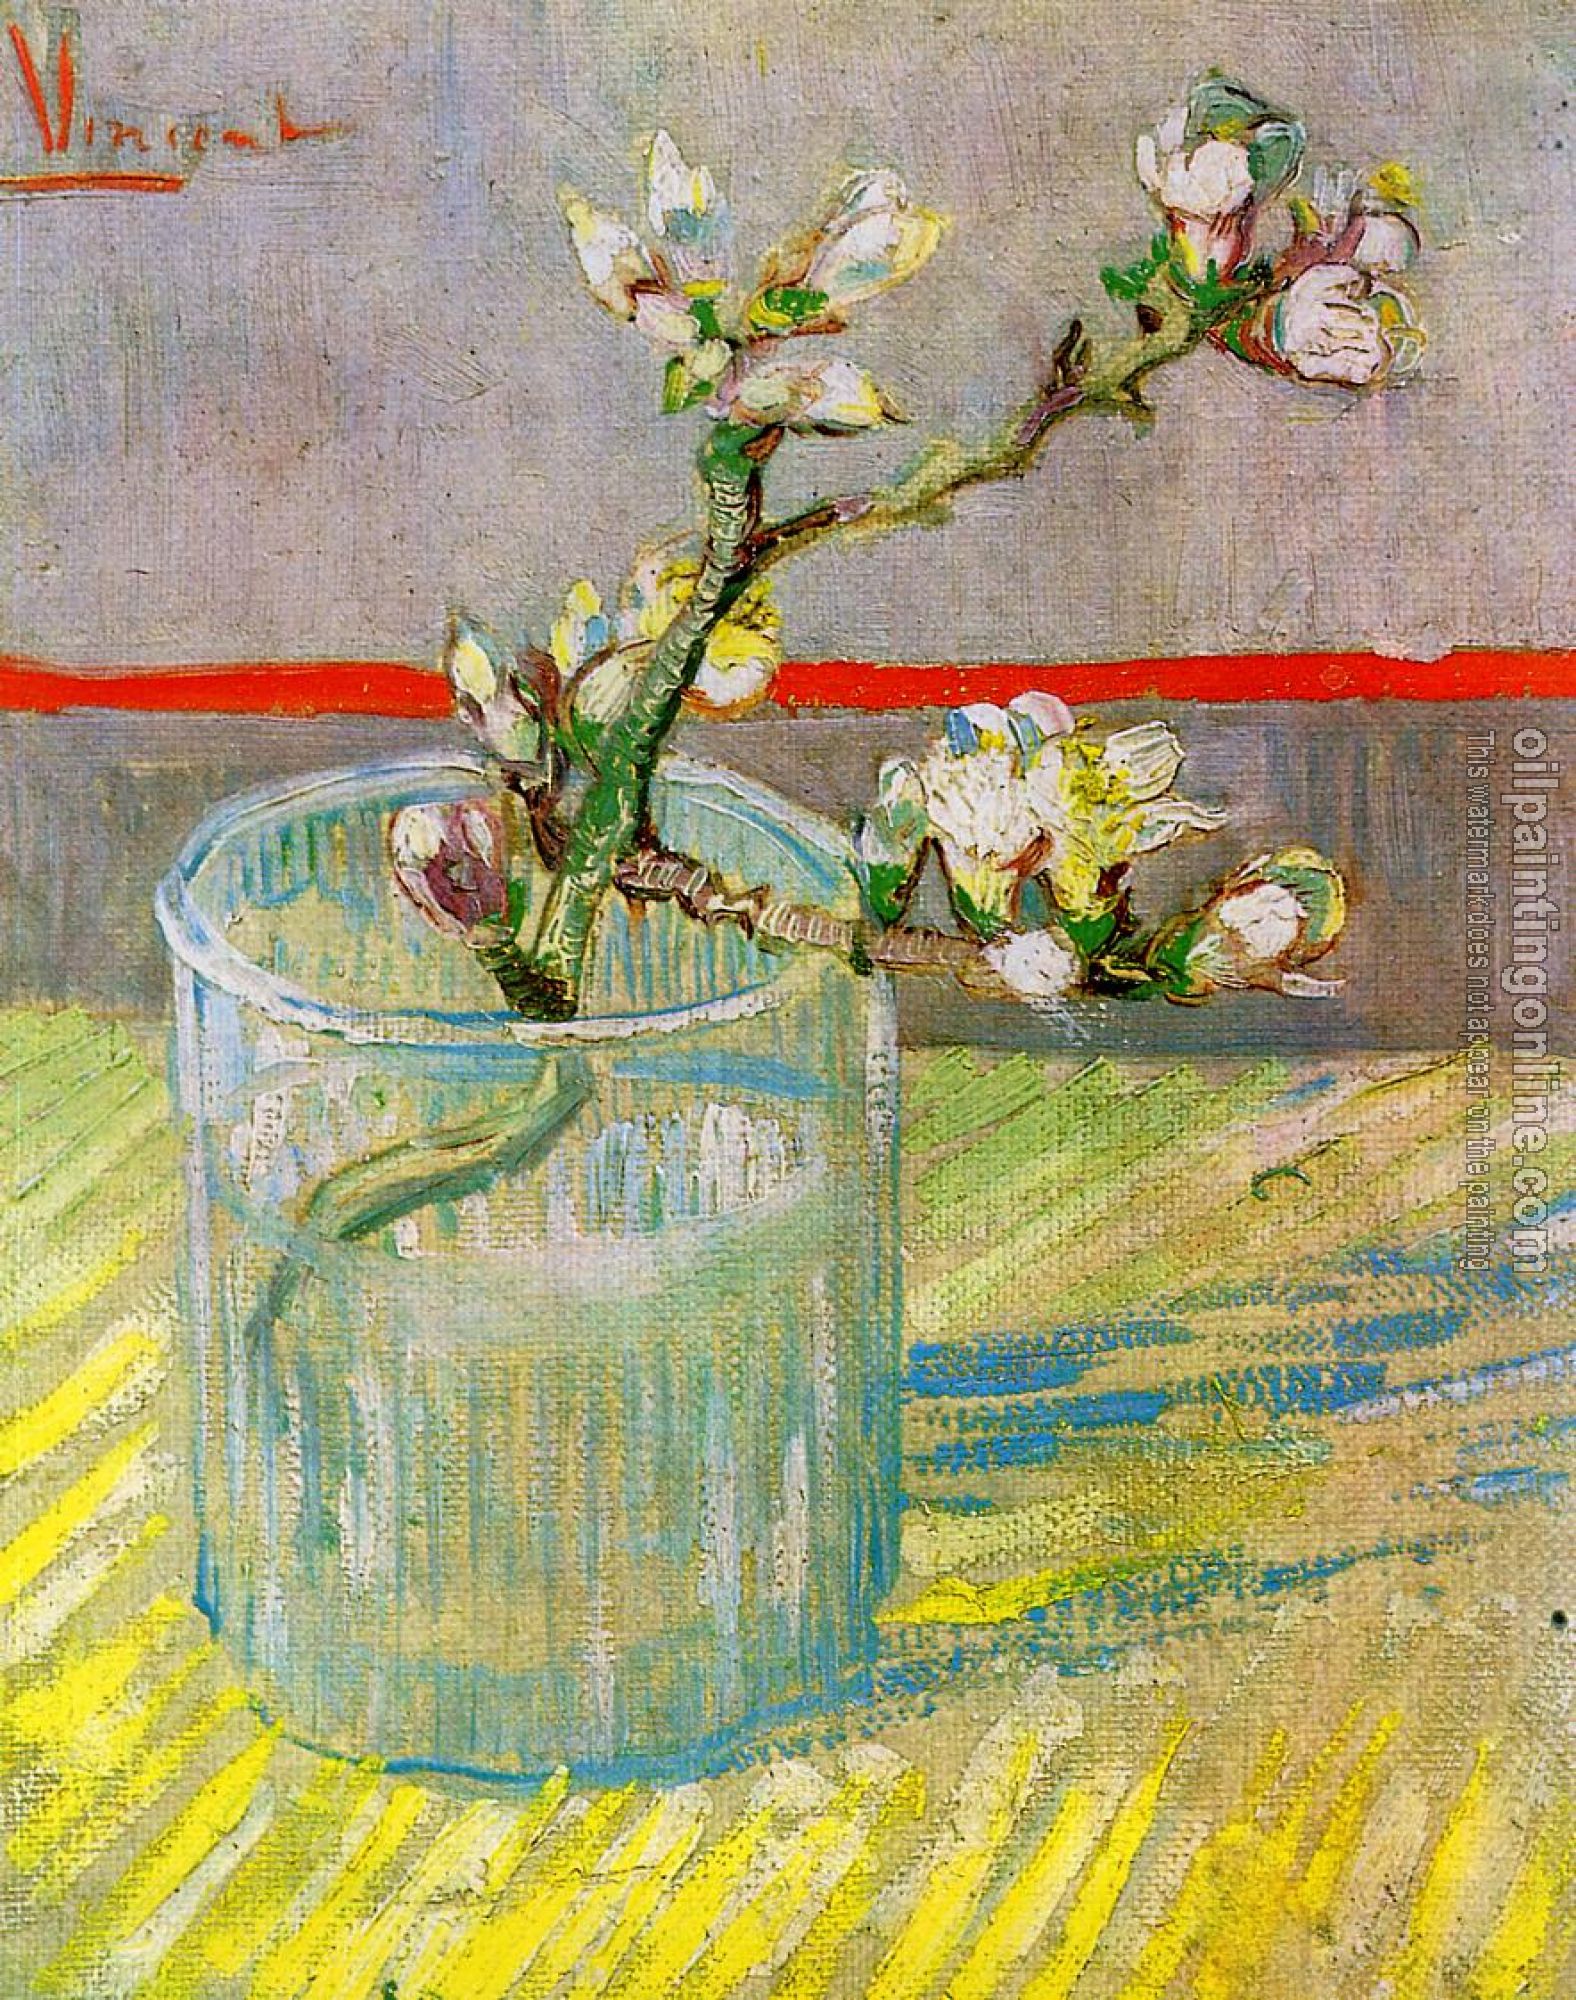 Gogh, Vincent van - Blossoming Almond Branch in a Glass